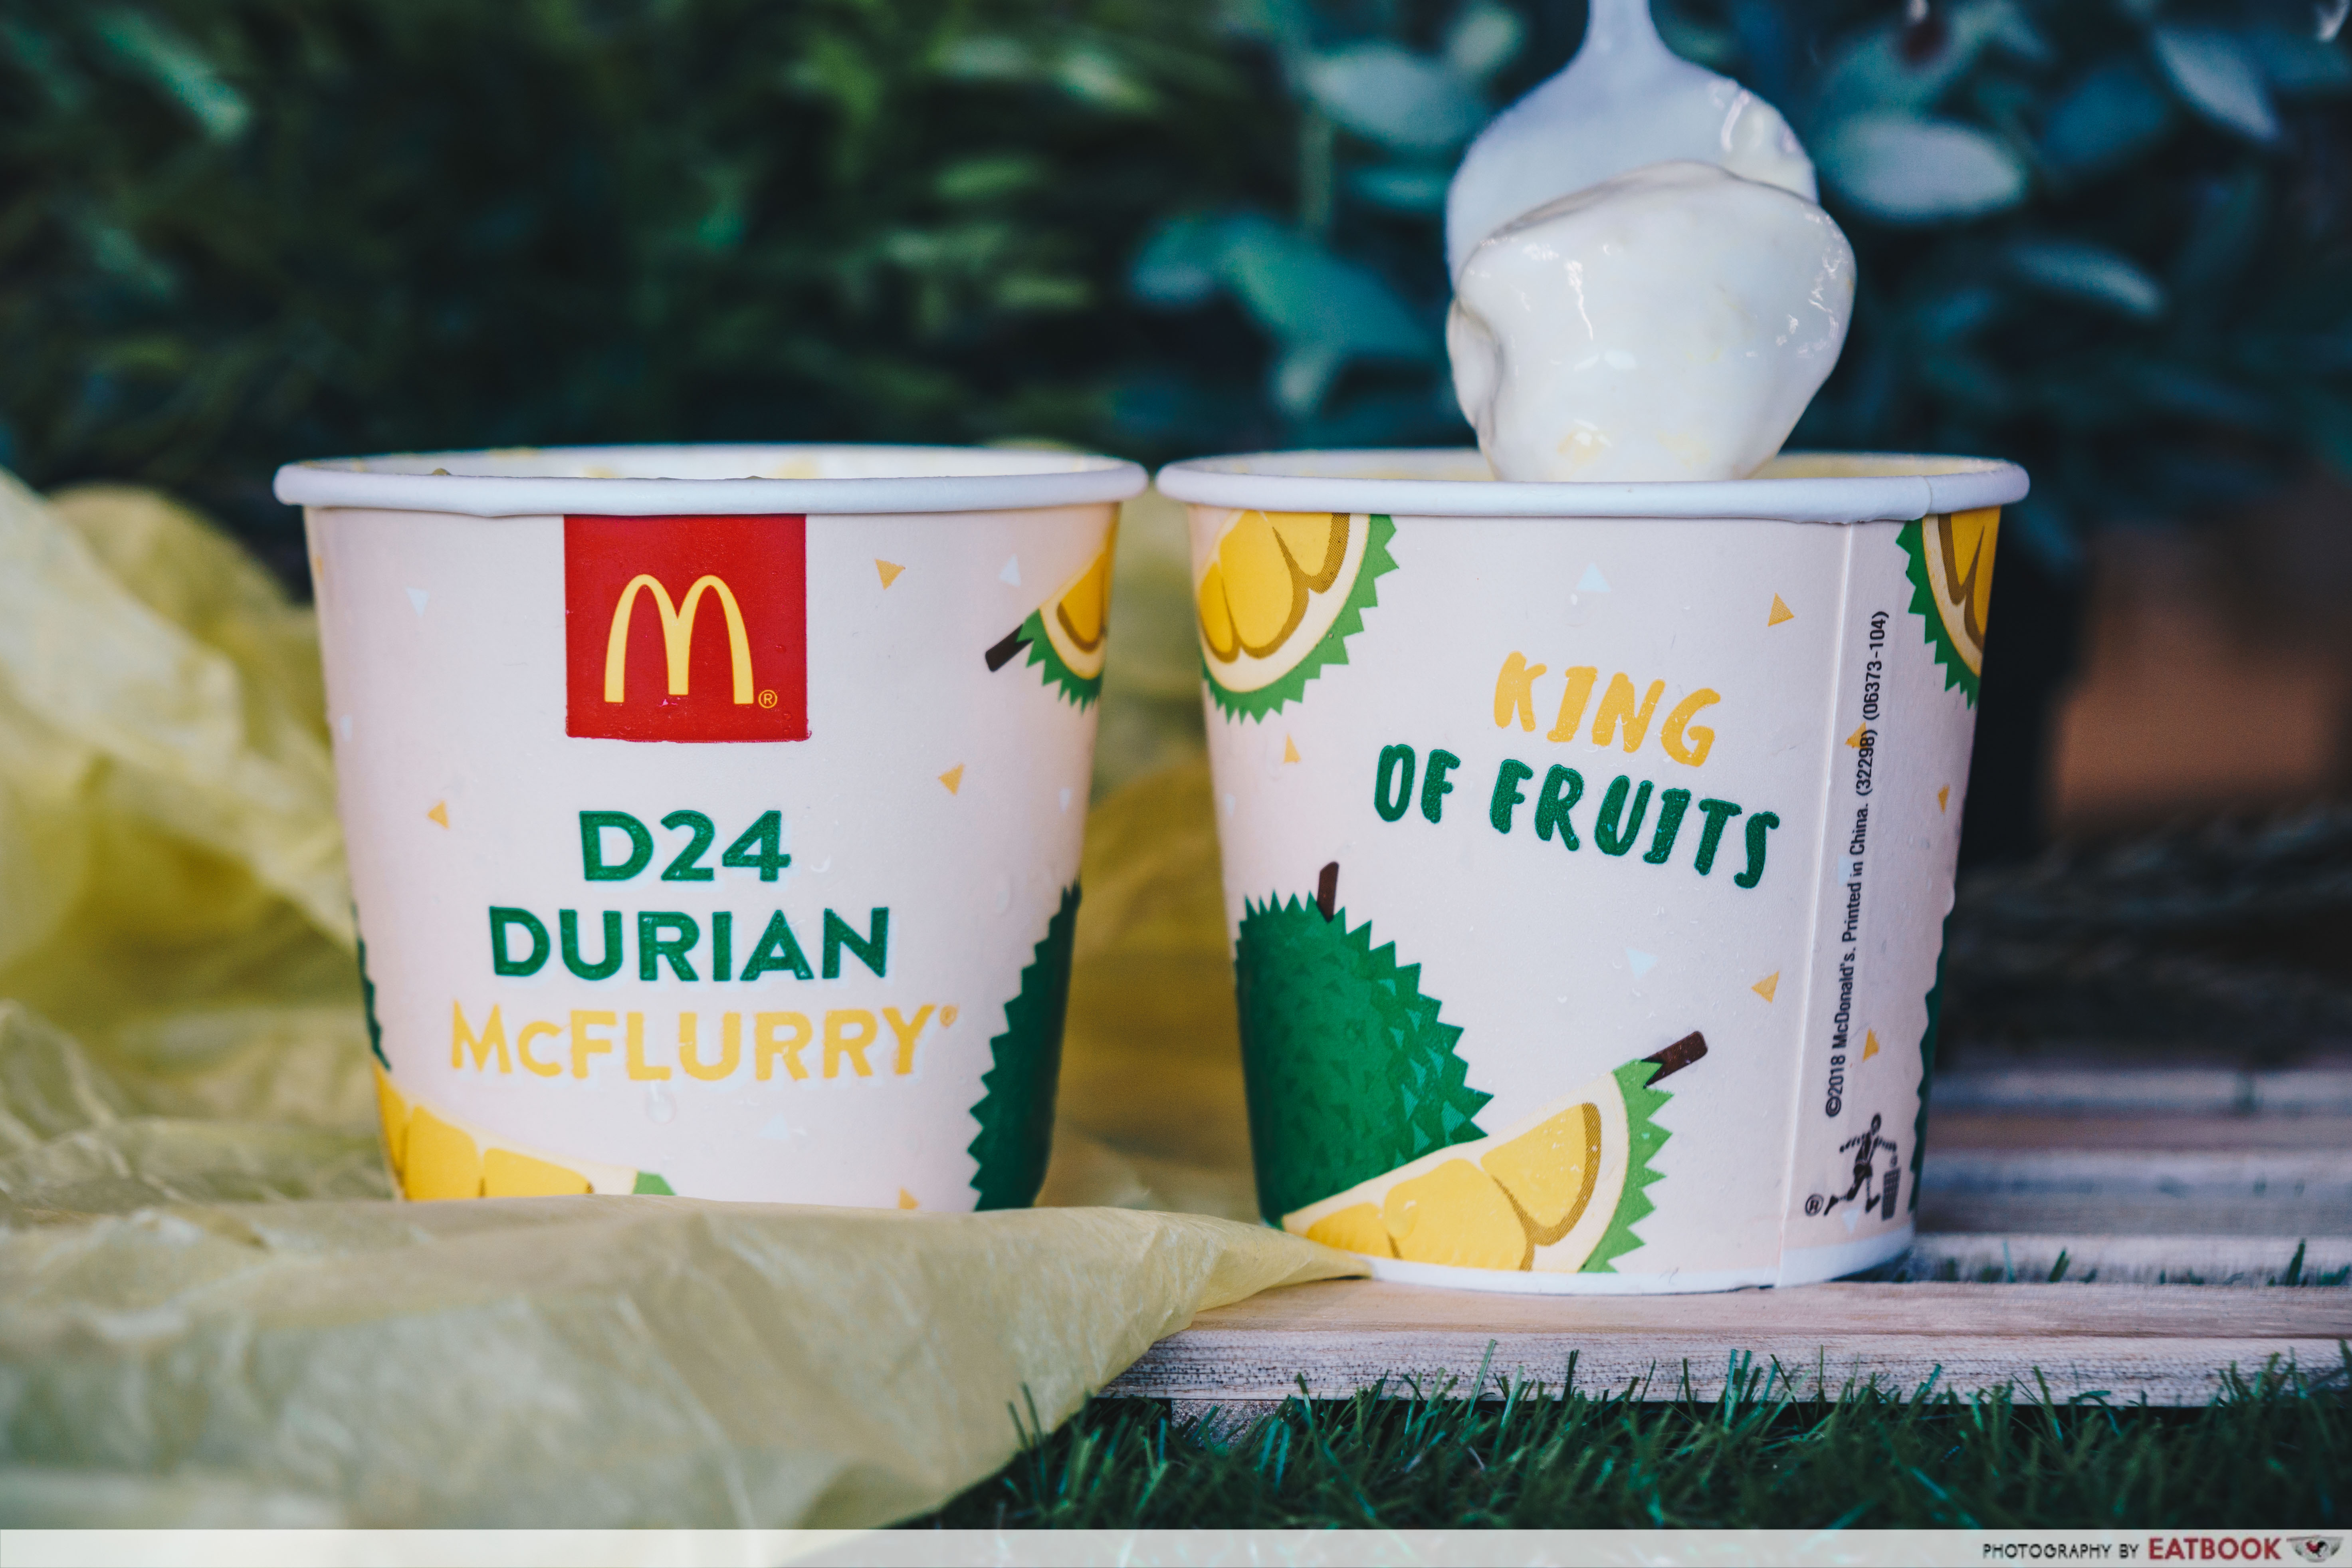 Durian McFlurry - Feature Image